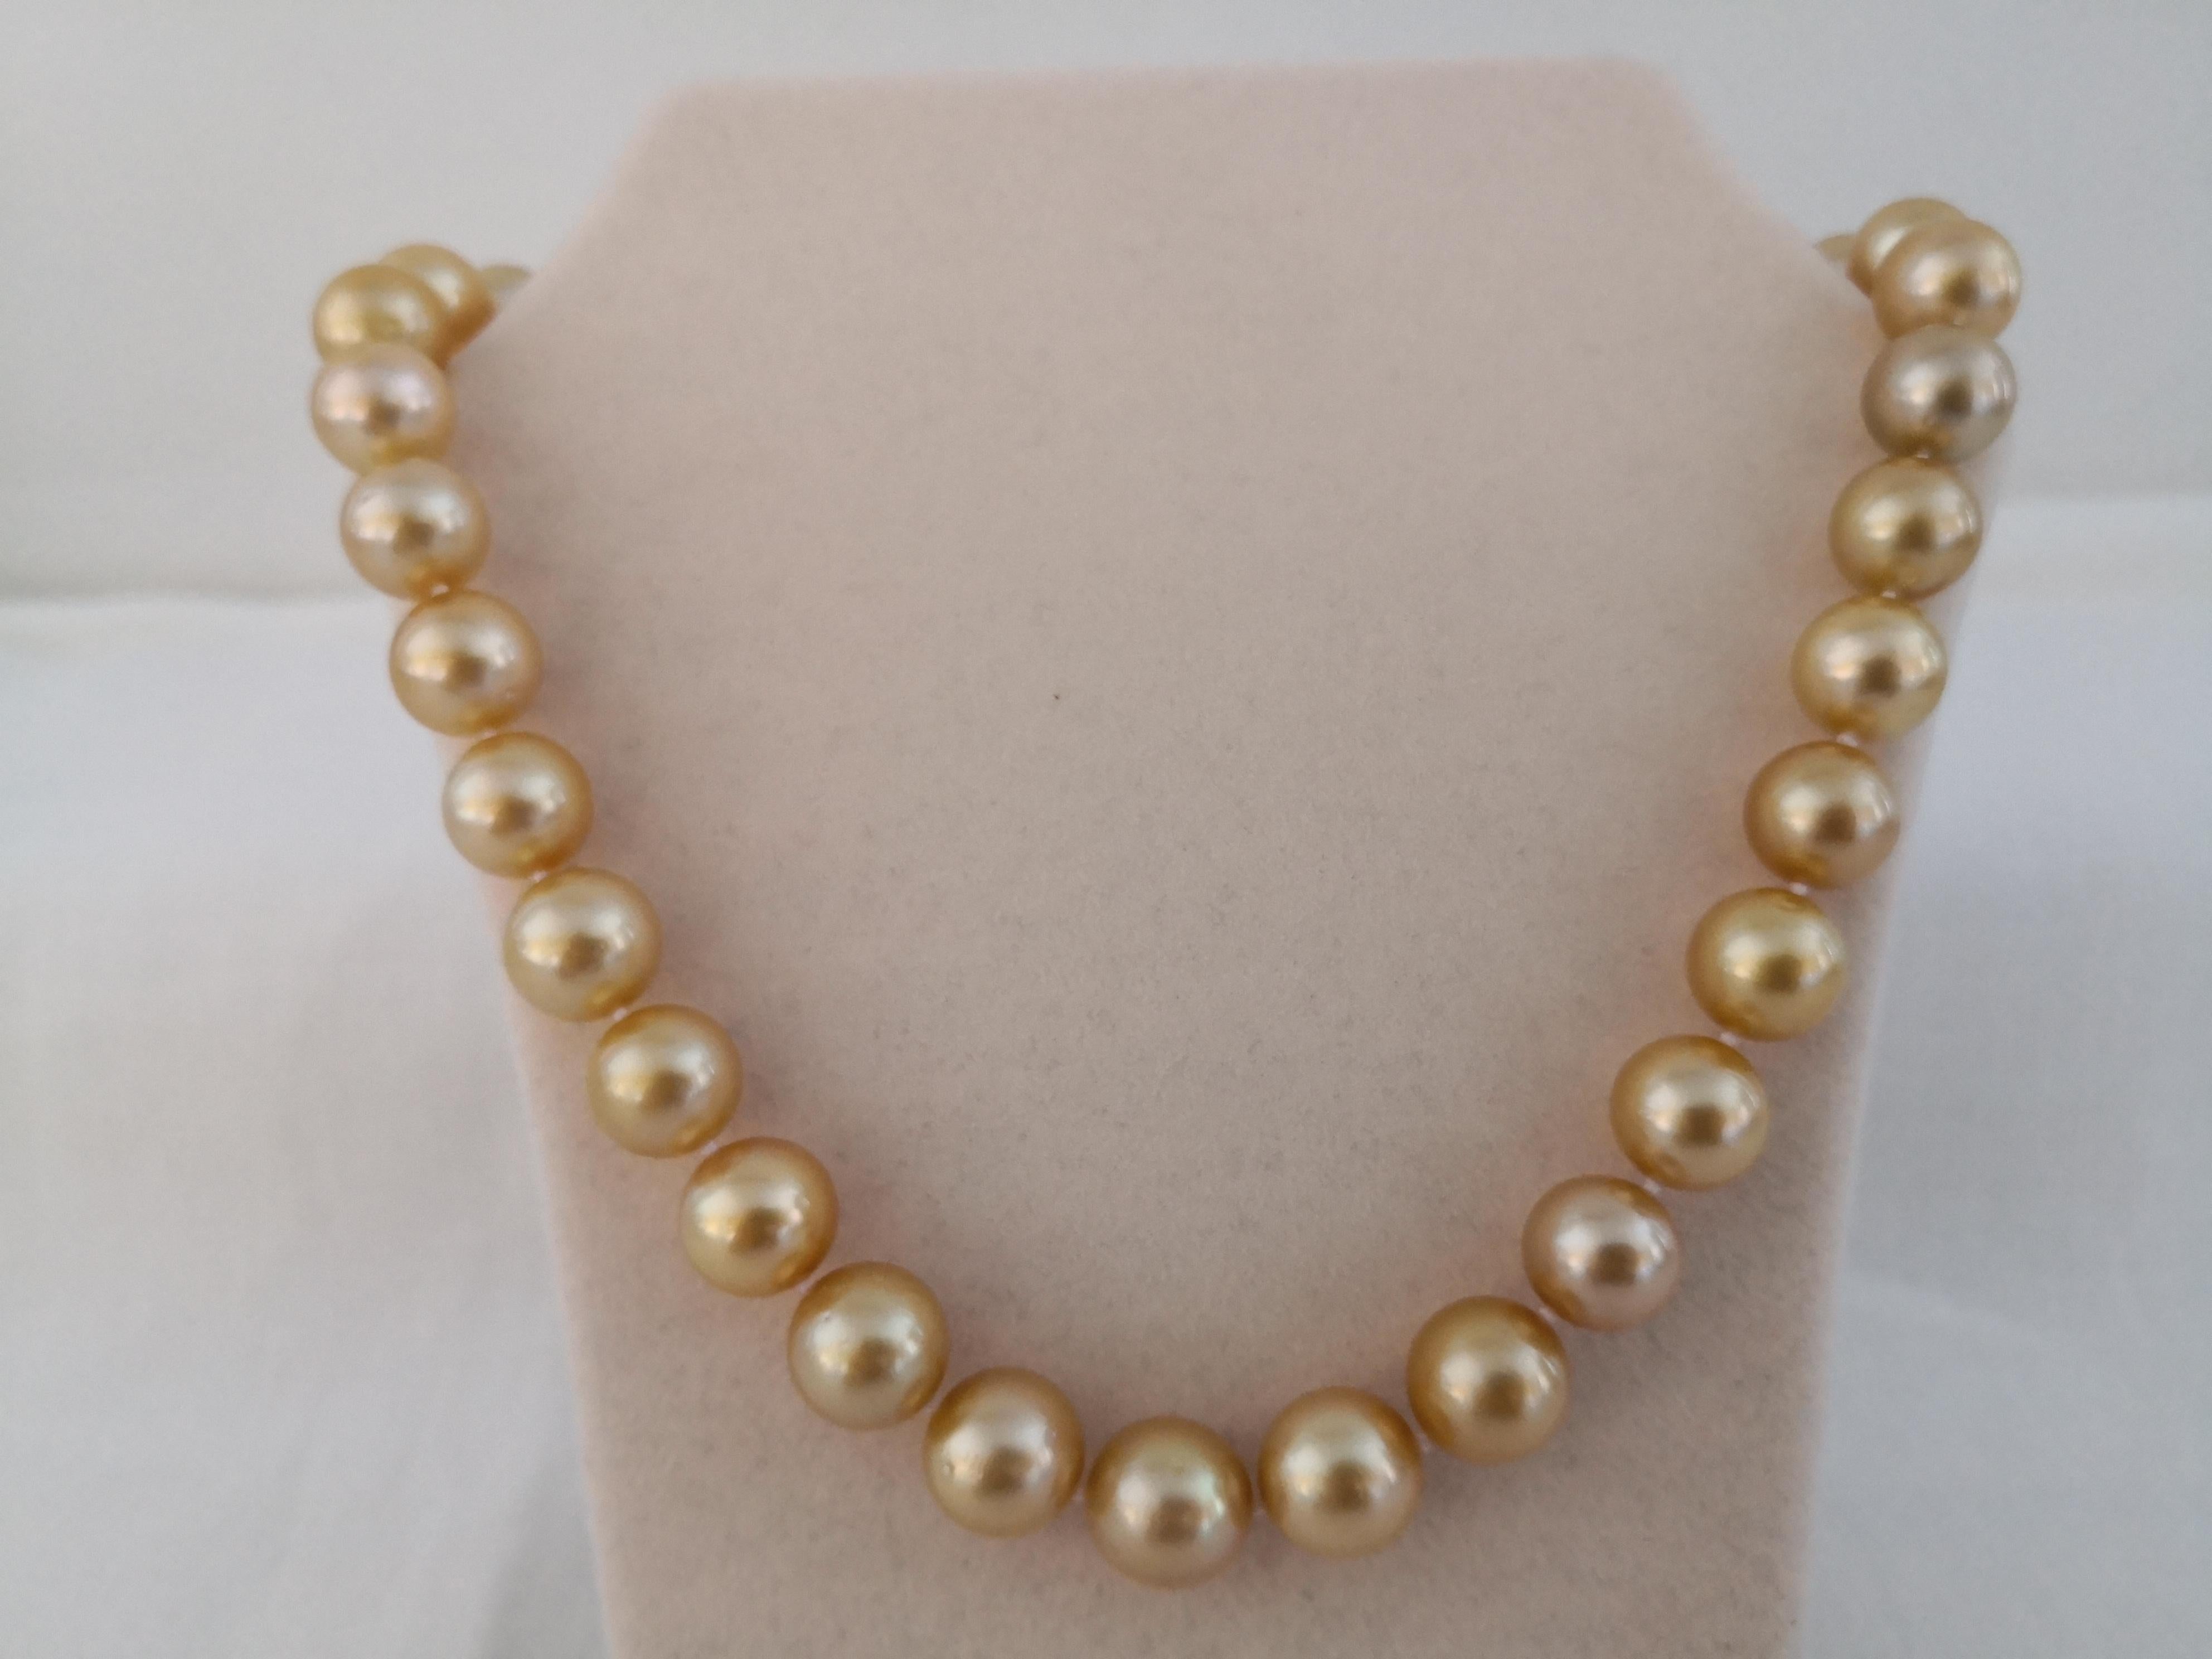 A Natural Color South Sea Pearls, from Indonesia ocean waters. A Deep Golden Color Pearls necklace, This color is rare and unique and is considered the most expensive one among South Sea Pearl. This color is also known as 